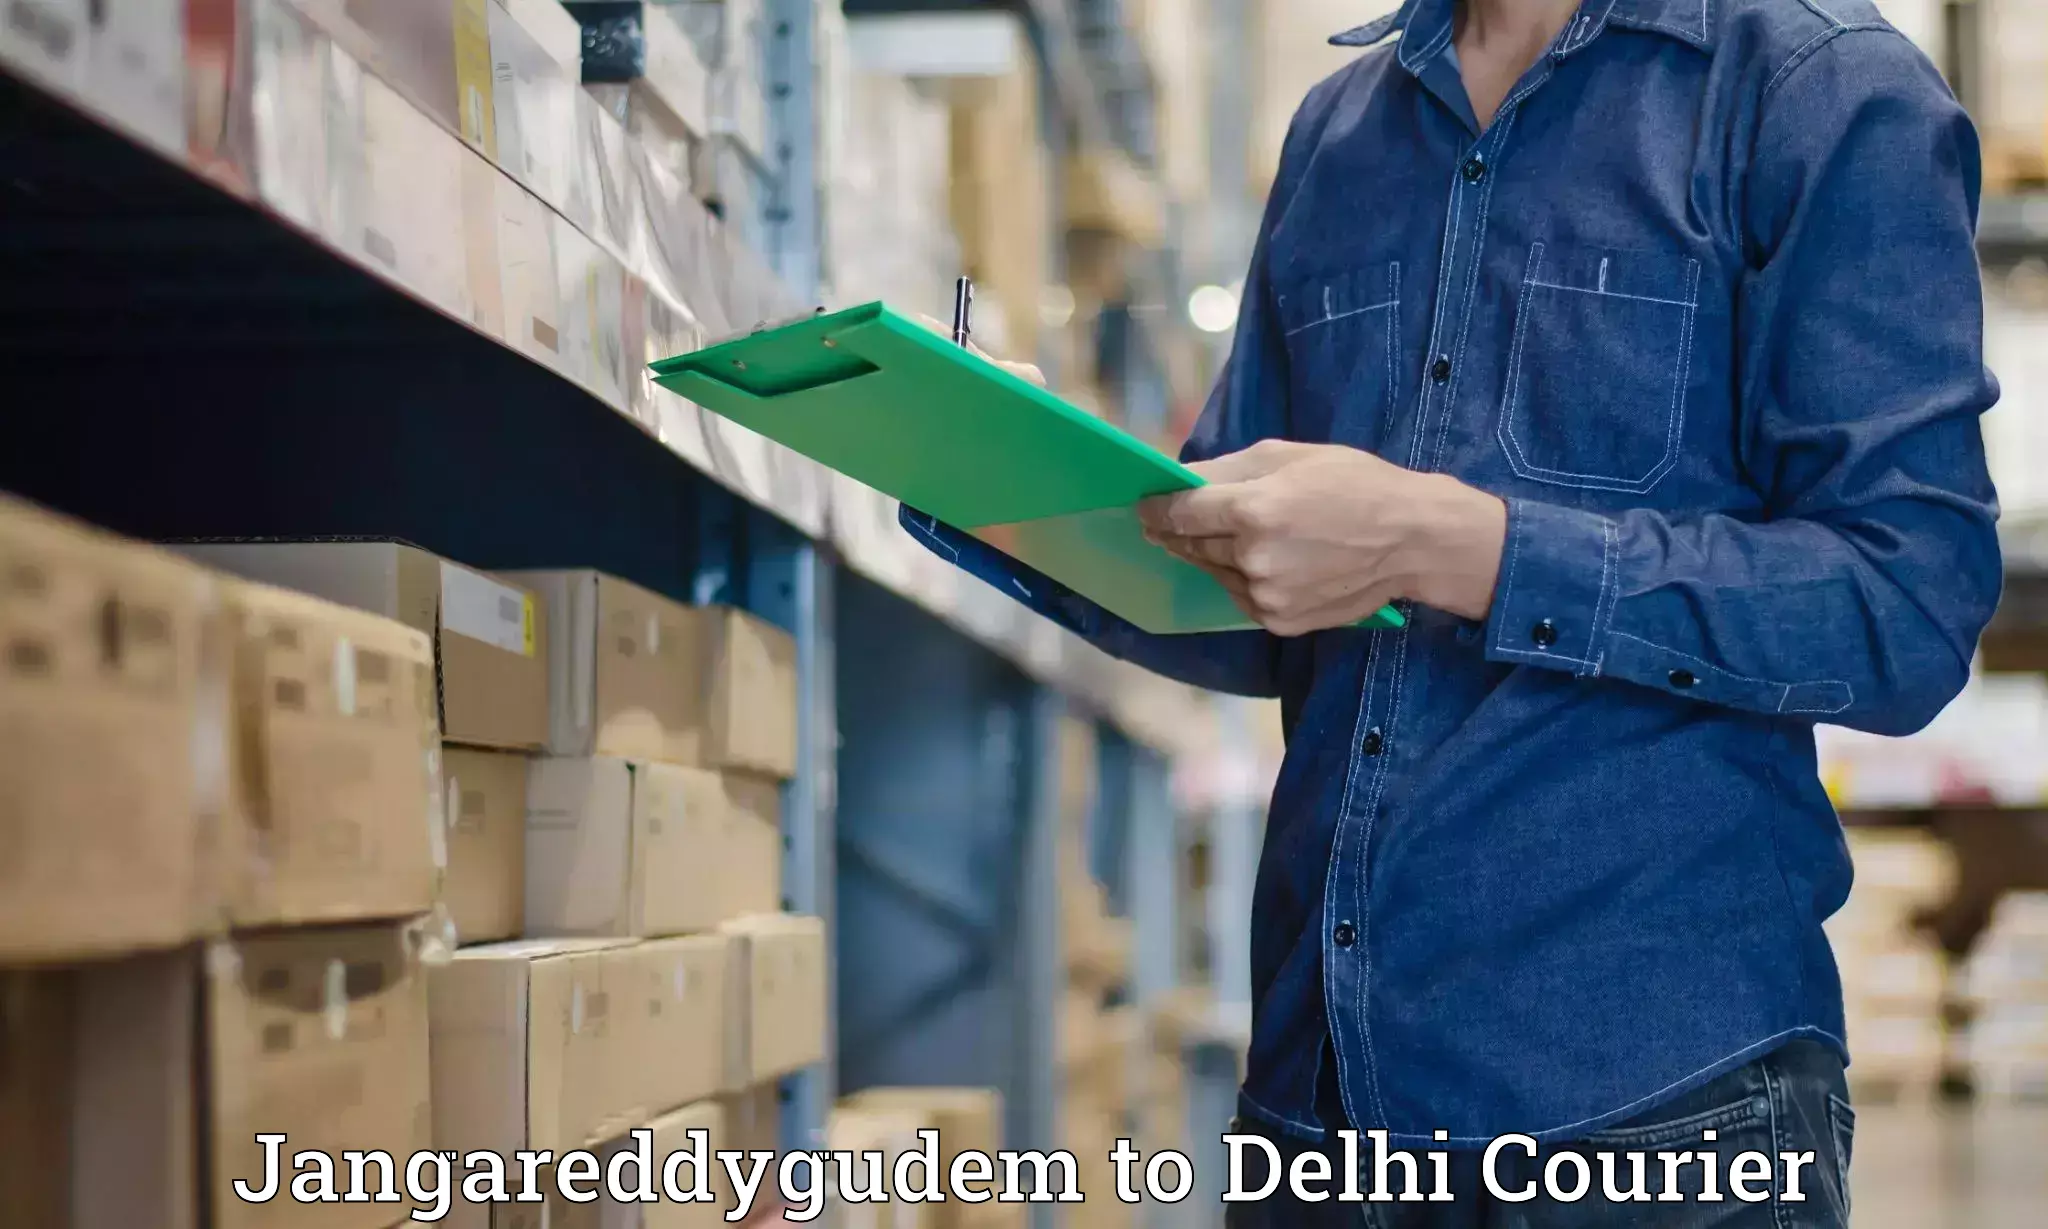 Express delivery solutions Jangareddygudem to NCR